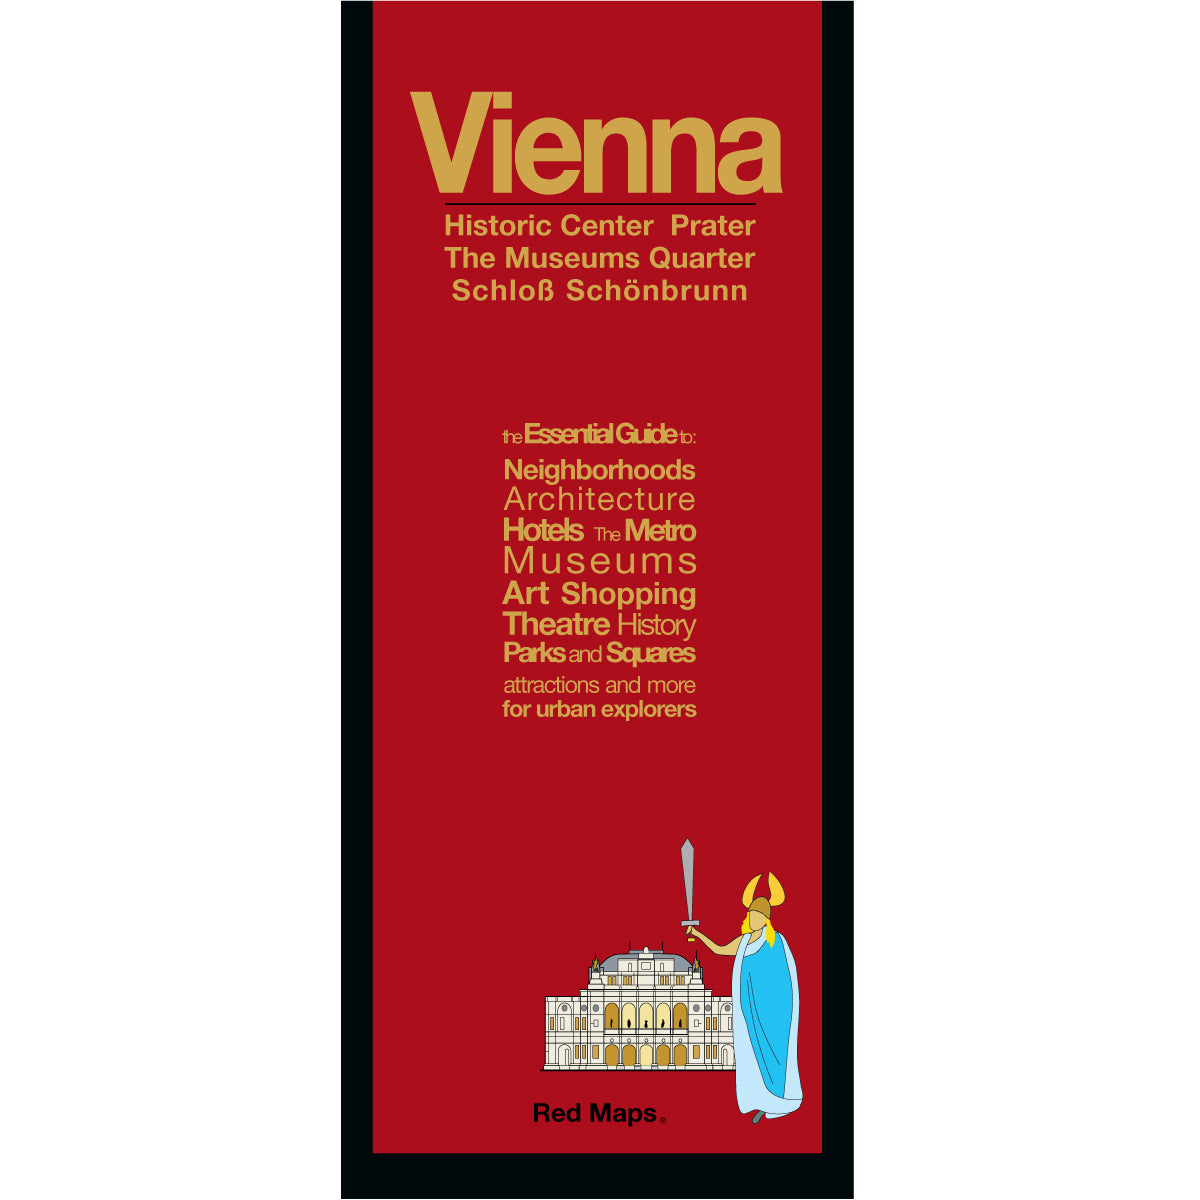 Vienna foldout map with a red colored cover.